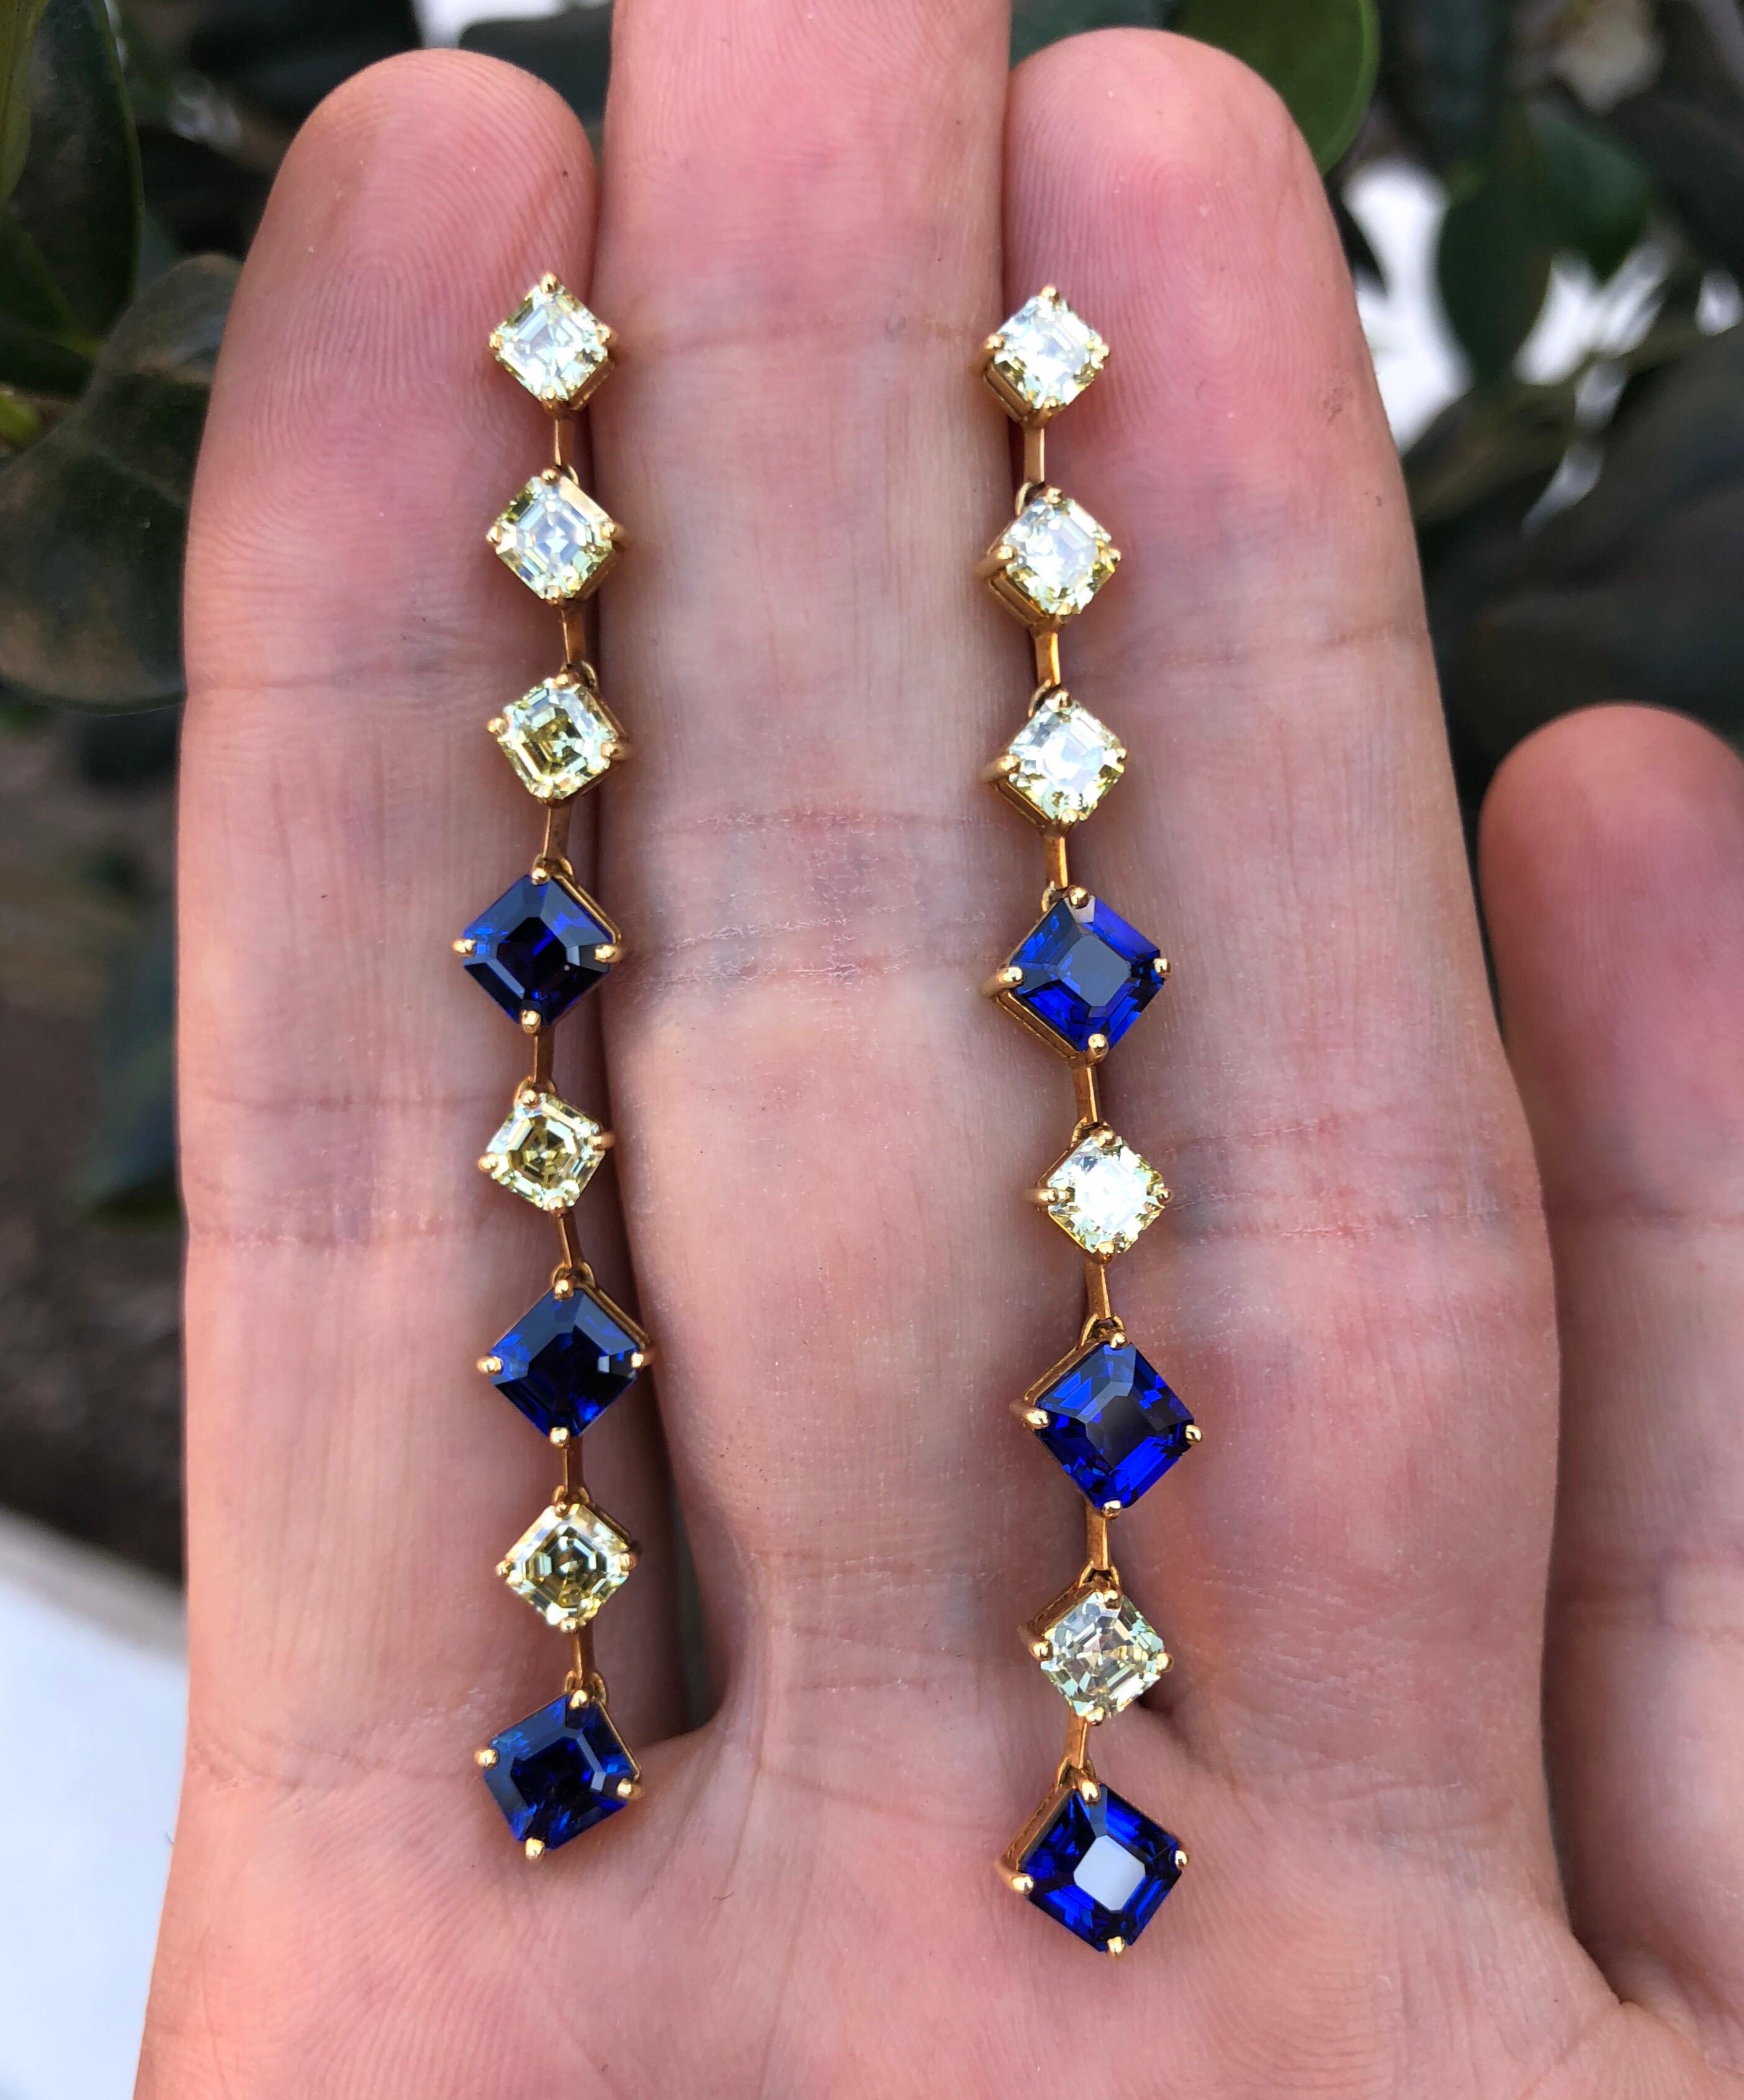 5.14 carats of royal blue, square emerald-cut sapphires, and 3.38 carats of fancy yellow Asscher cut diamonds, are hand set in these very unique 18K yellow gold drop earrings.
Length: 2.5 inches. 